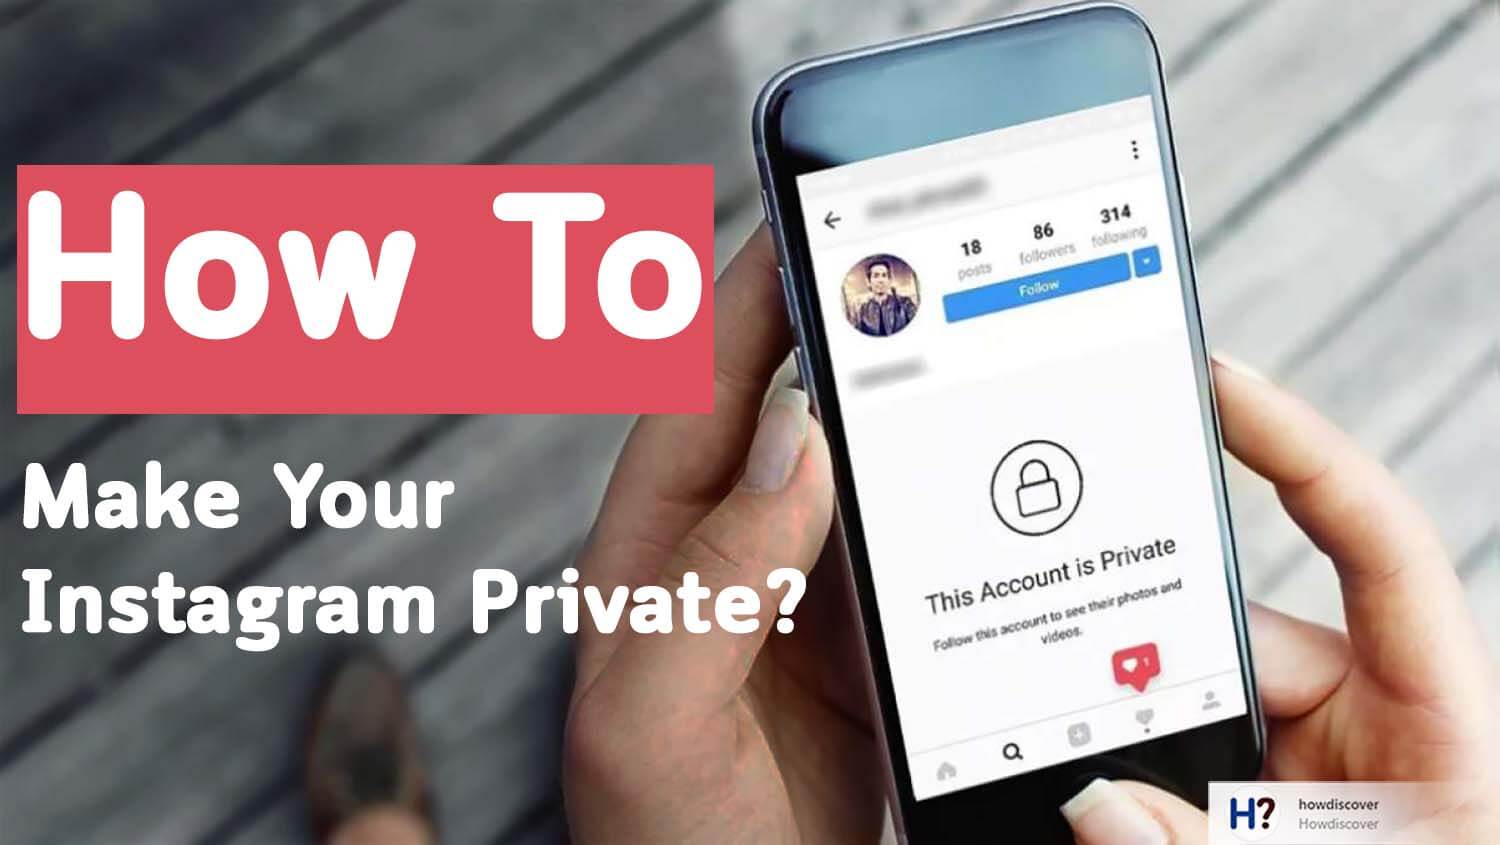 How To Make Your Instagram Private?